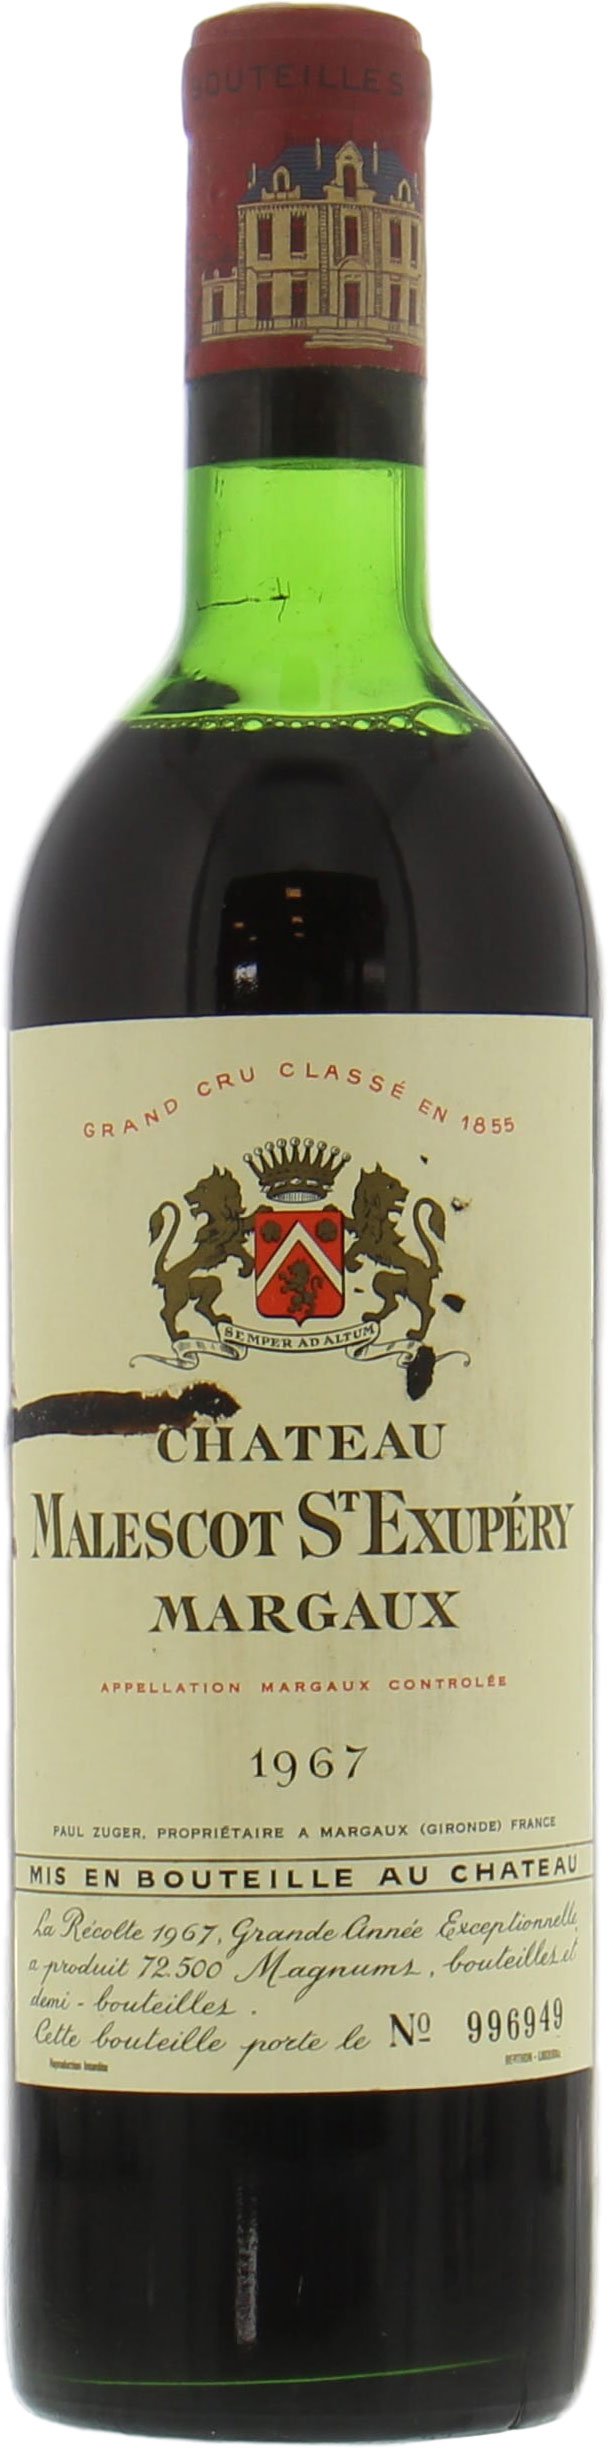 Chateau Malescot-St-Exupery - Chateau Malescot-St-Exupery 1967 High shoulder